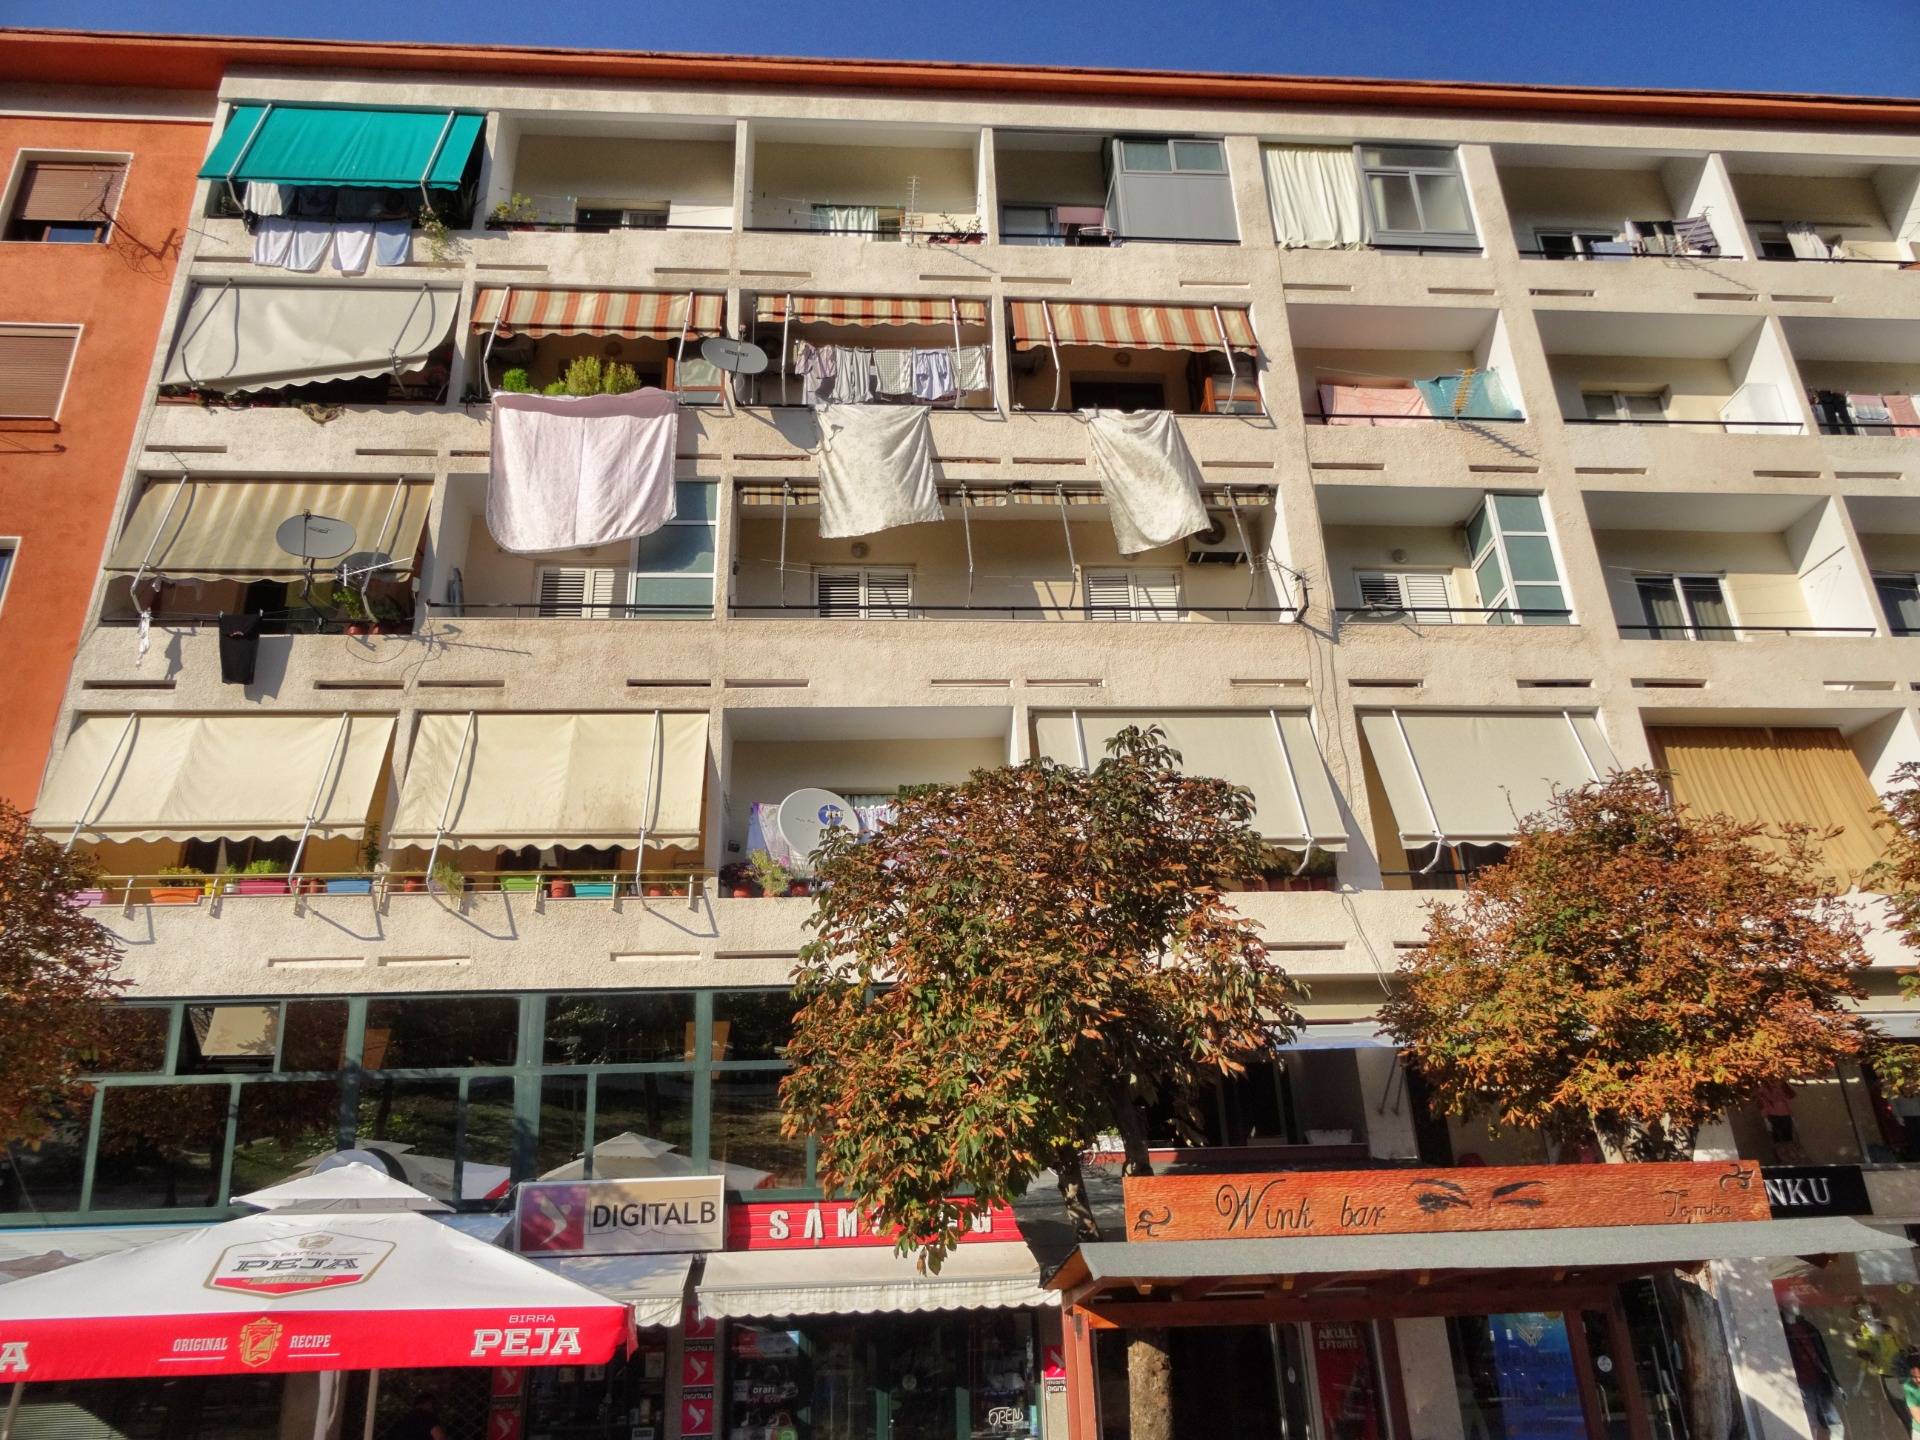 You know that you are in Albania when laundry is hanging on the balconies